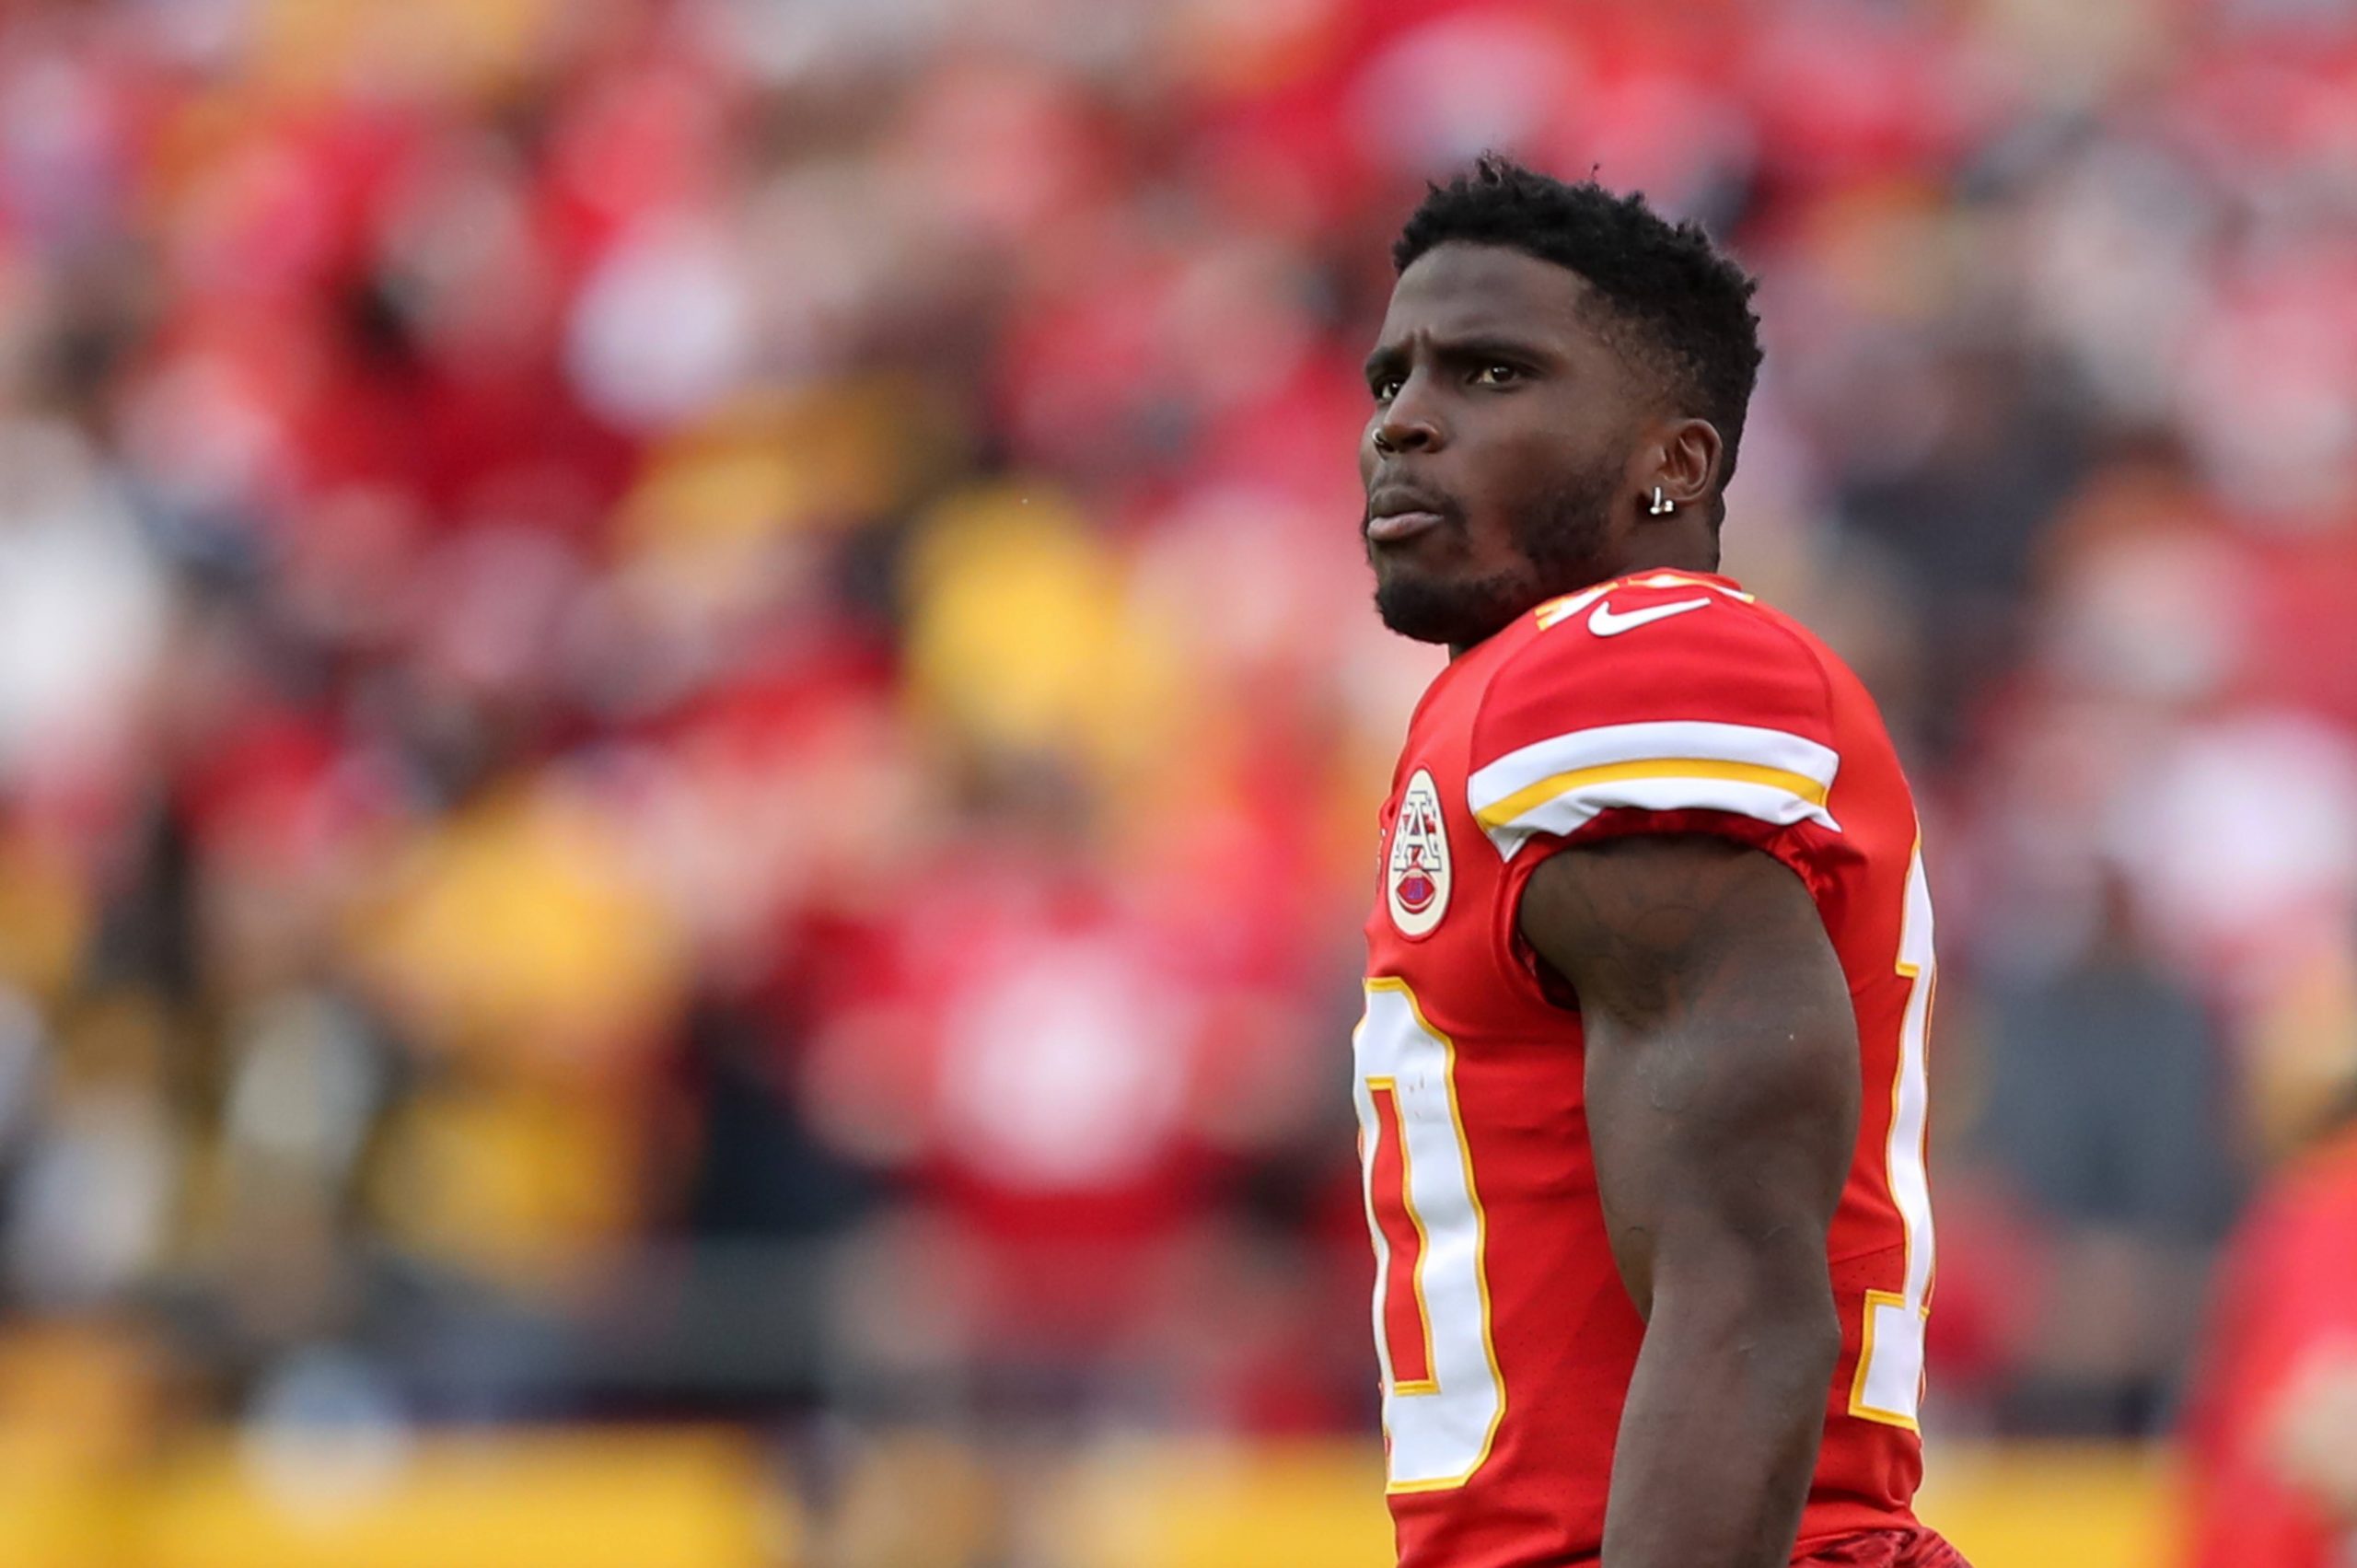 KANSAS CITY, MO - DECEMBER 26: Kansas City Chiefs wide receiver Tyreek Hill 10 before an NFL, American Football Herren, USA game between the Pittsburgh Steelers and Kansas City Chiefs on Dec 26, 2021 at GEHA Field at Arrowhead Stadium in Kansas City, MO. Photo by Scott Winters/Icon Sportswire NFL: DEC 26 Steelers at Chiefs Icon2112260818